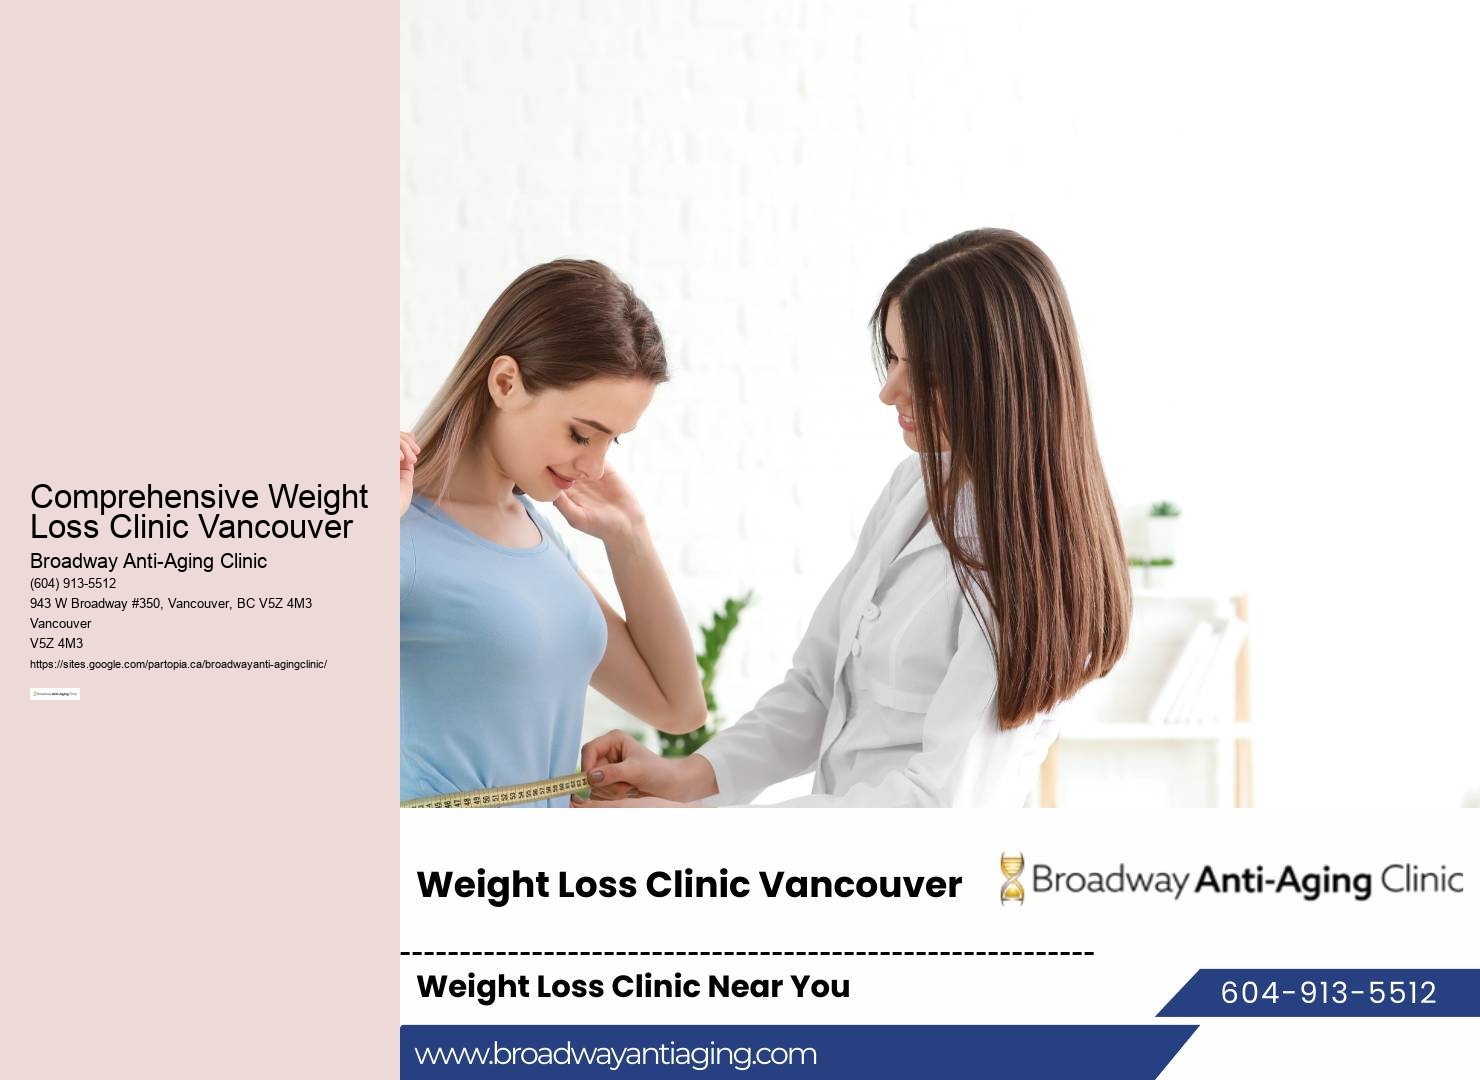 Comprehensive Weight Loss Clinic Vancouver